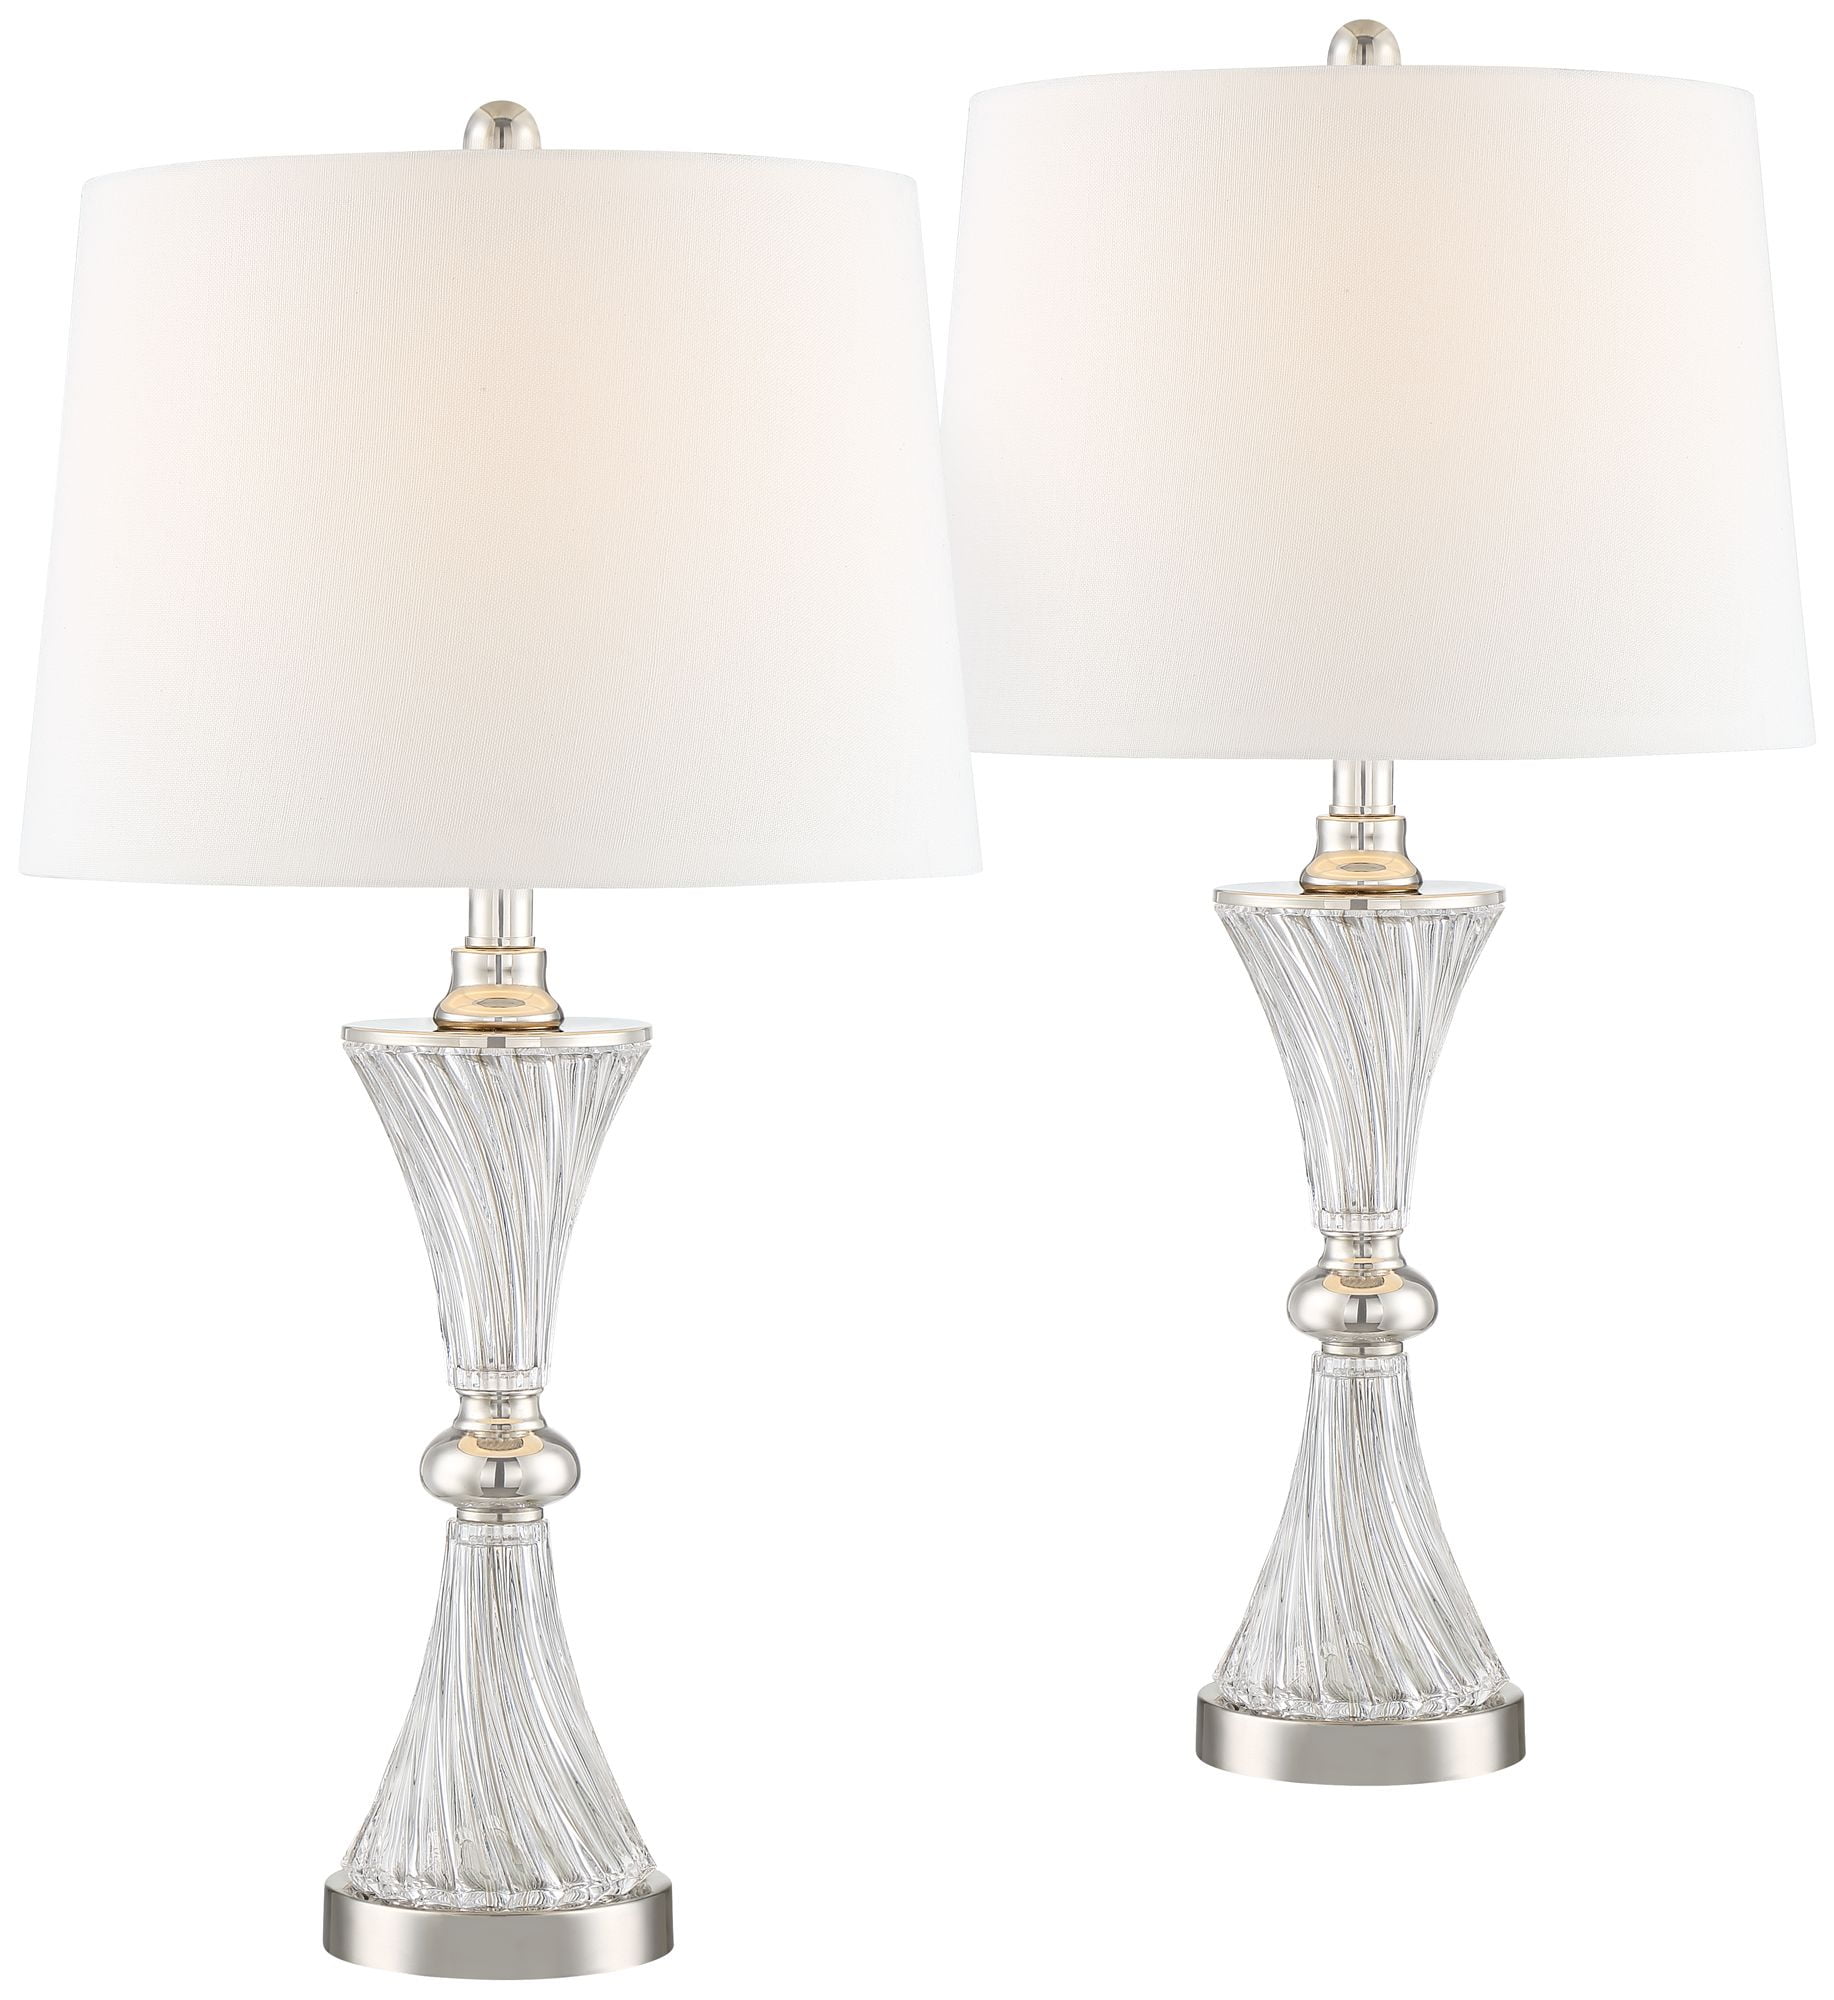 Regency Hill Traditional Table Lamps Set of 2 Mercury Glass Twist White  Empire Shade for Living Room, Family, Bedroom, Bedside, Office - Walmart.com